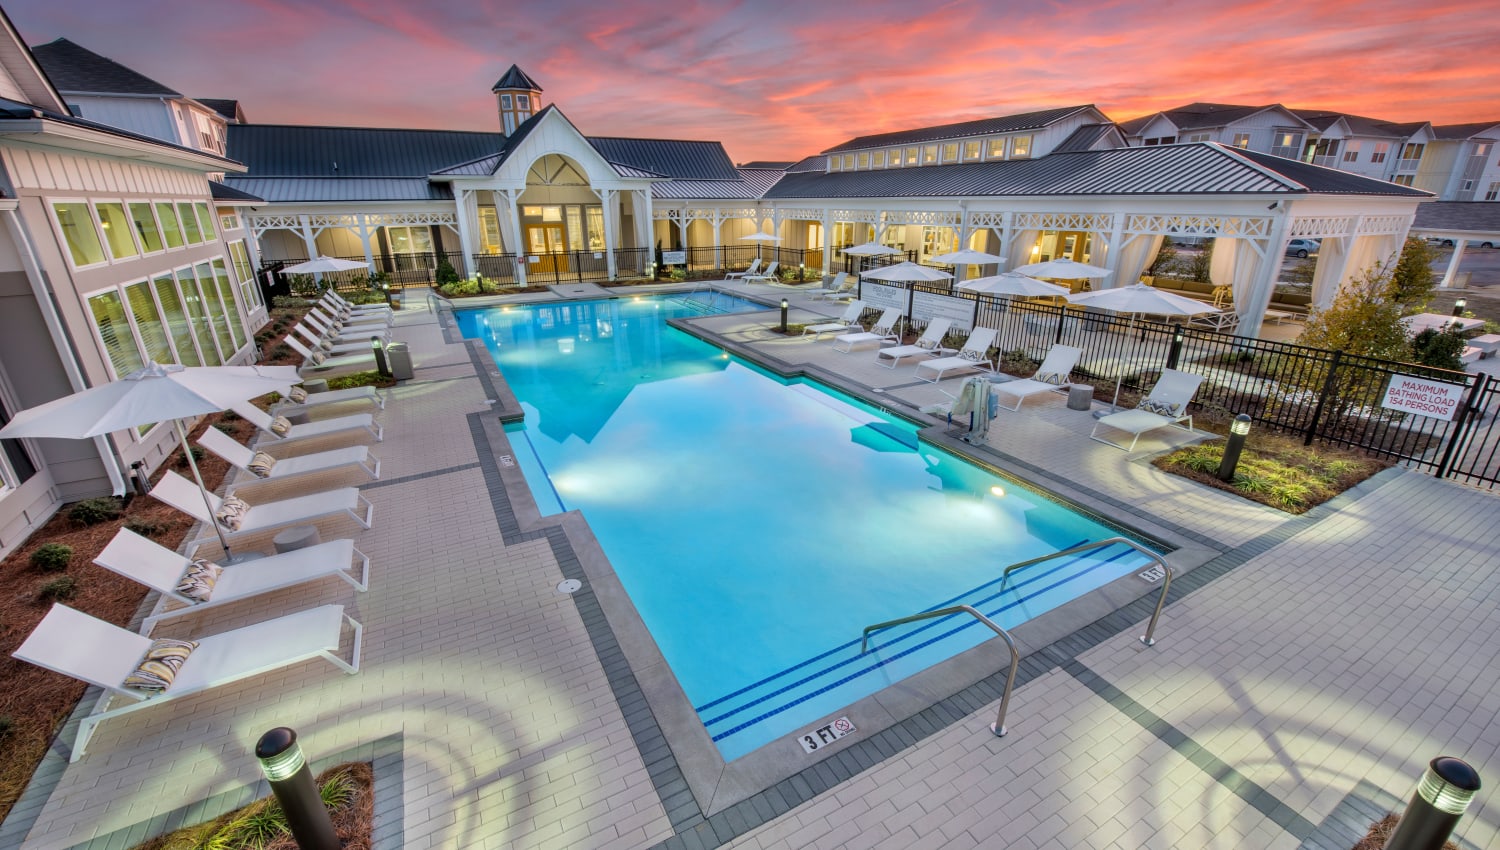 Sparkling pool at sunset at Capital Crest at Godley Station in Savannah, Georgia